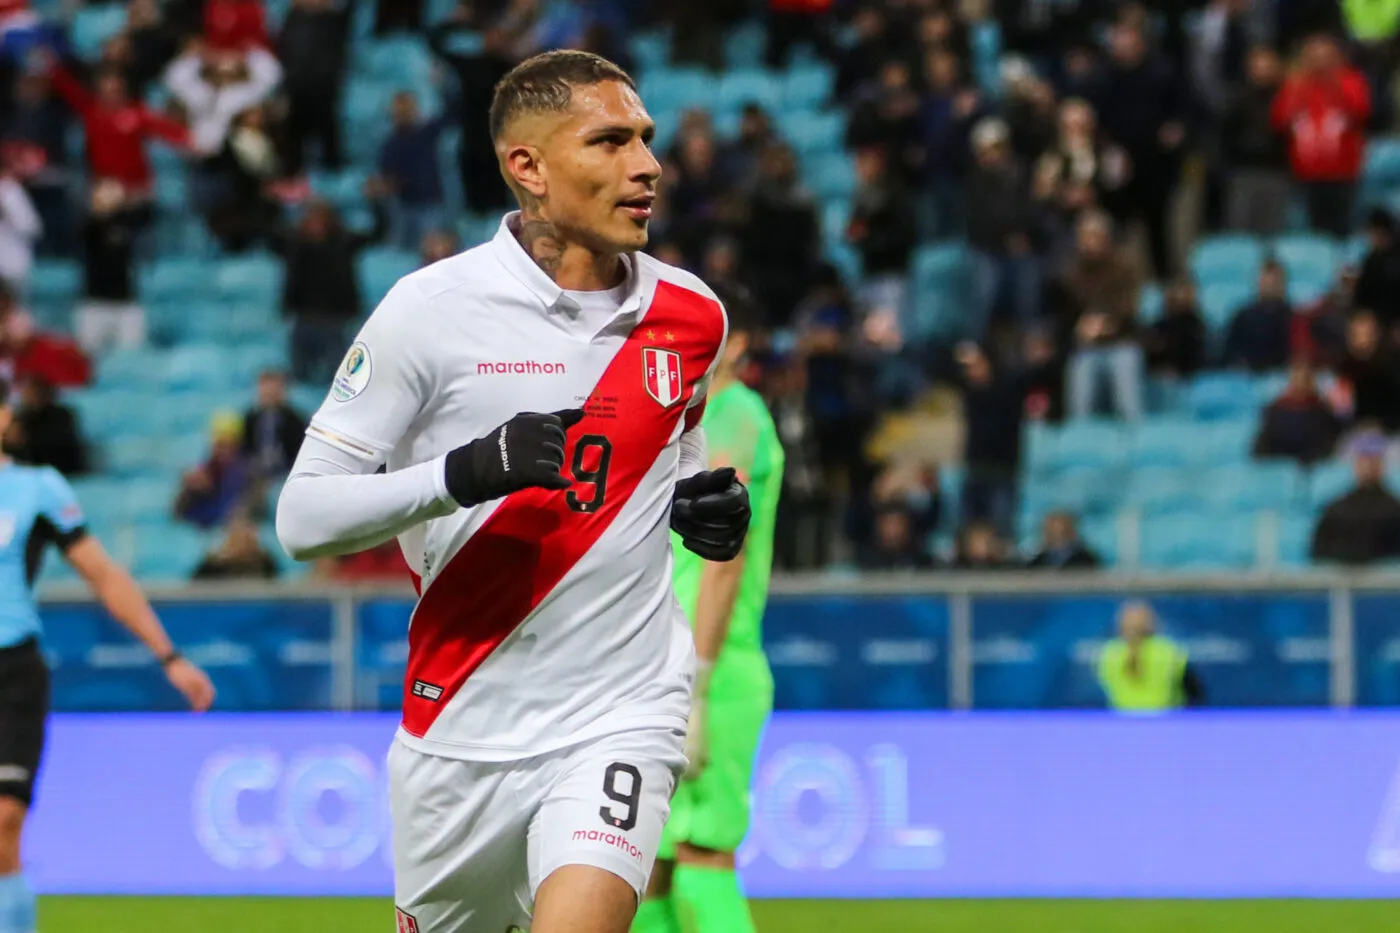 Paolo Guerrero of Peru celebrates his goal for 0-3 in the 90th minute of the game during the Copa America match between Chile and Peru, in Arena Grimio, Porto Alegre, on July 3rd, 2019.